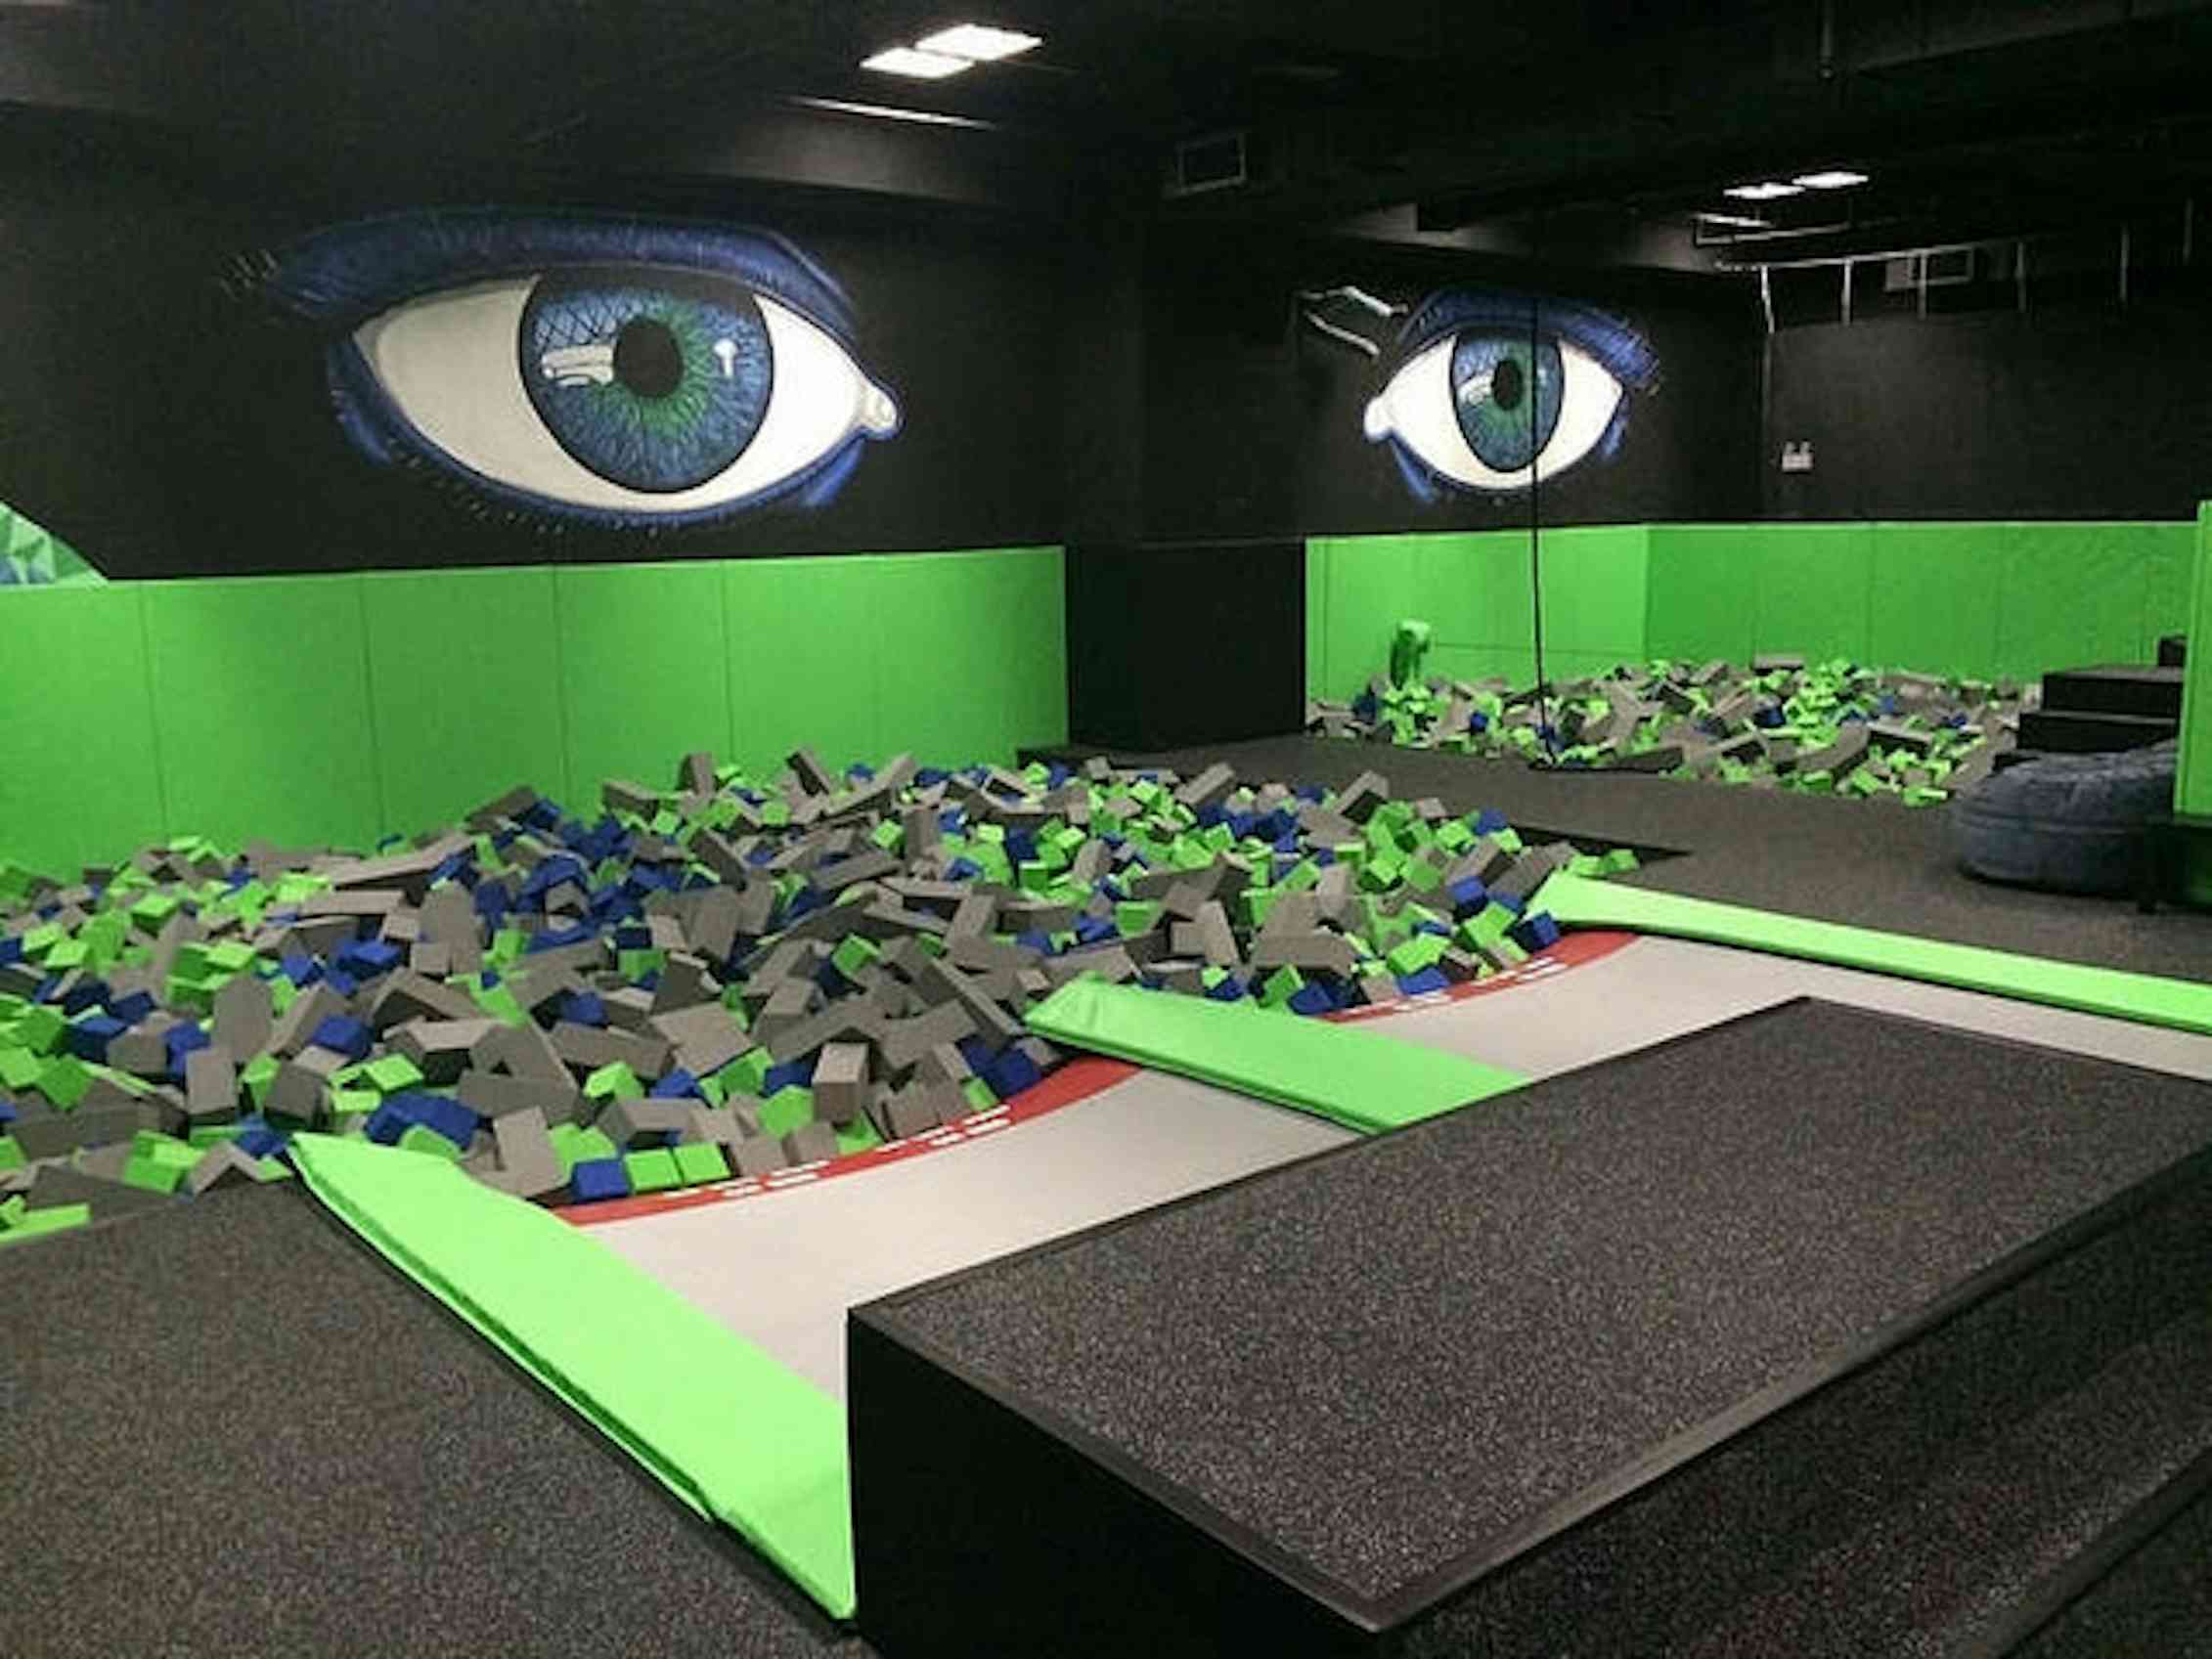 Without Mandatory Safety Standards Indoor Trampoline Parks Are An